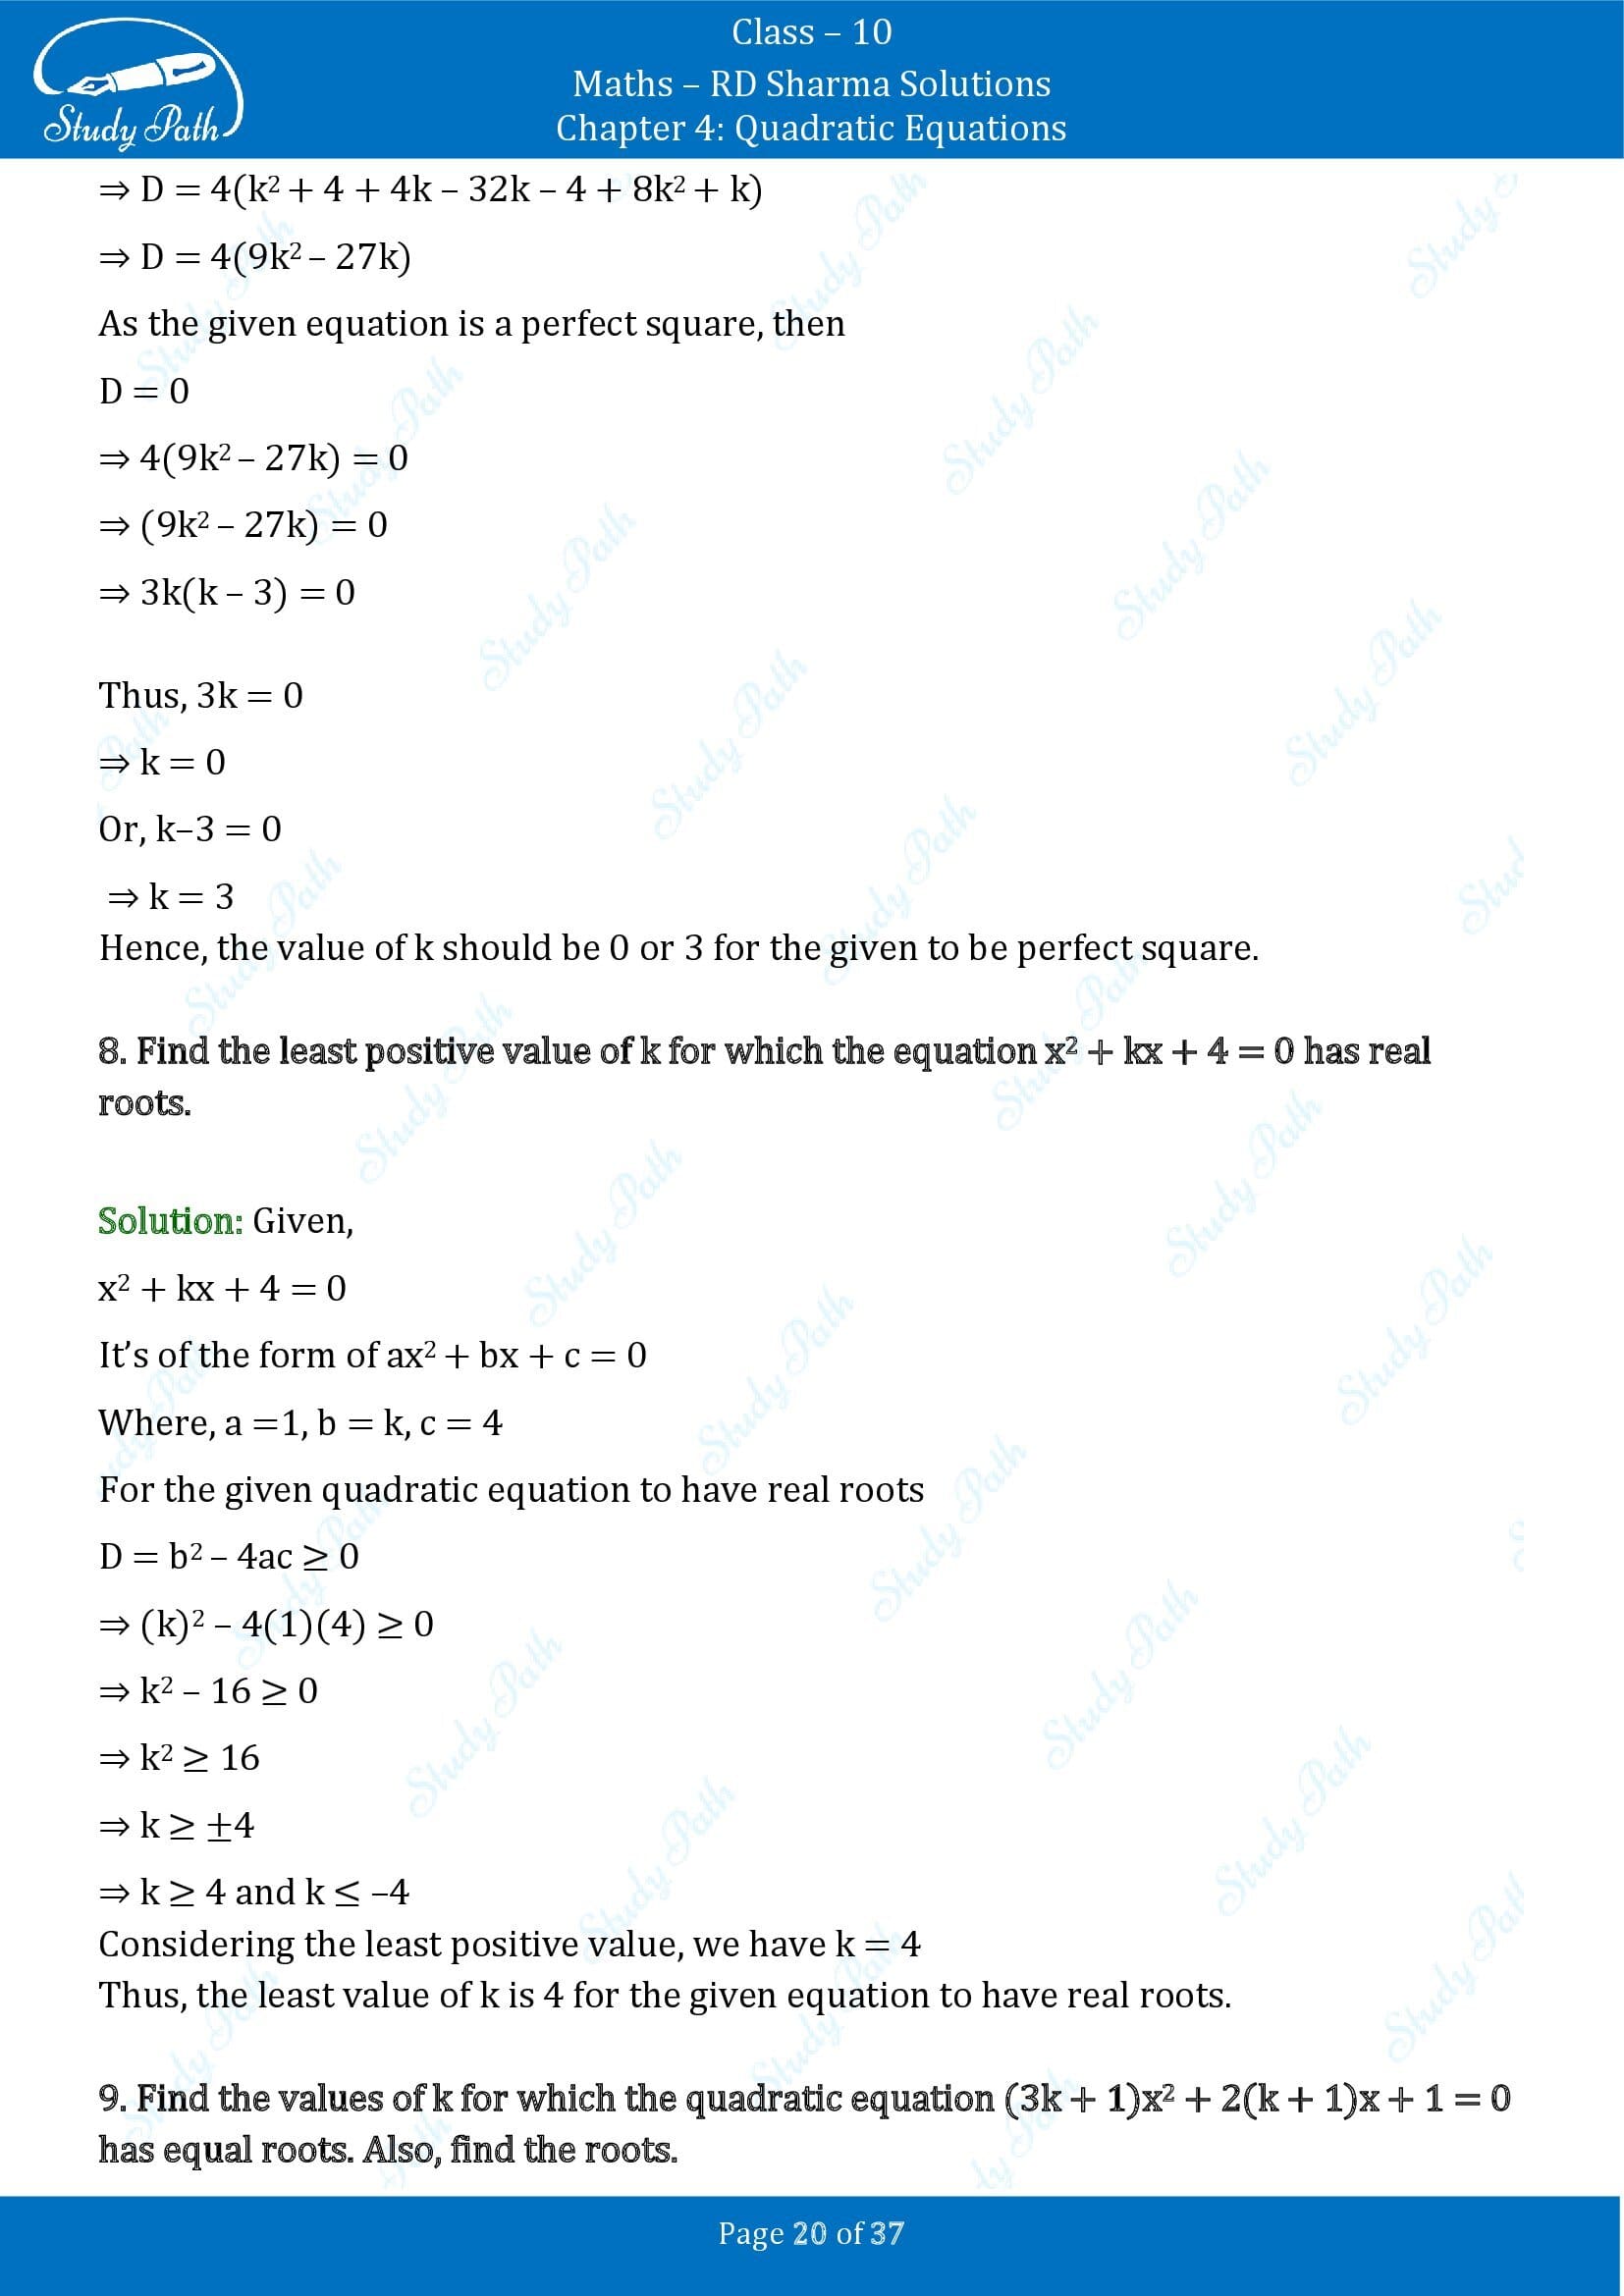 RD Sharma Solutions Class 10 Chapter 4 Quadratic Equations Exercise 4.6 00020